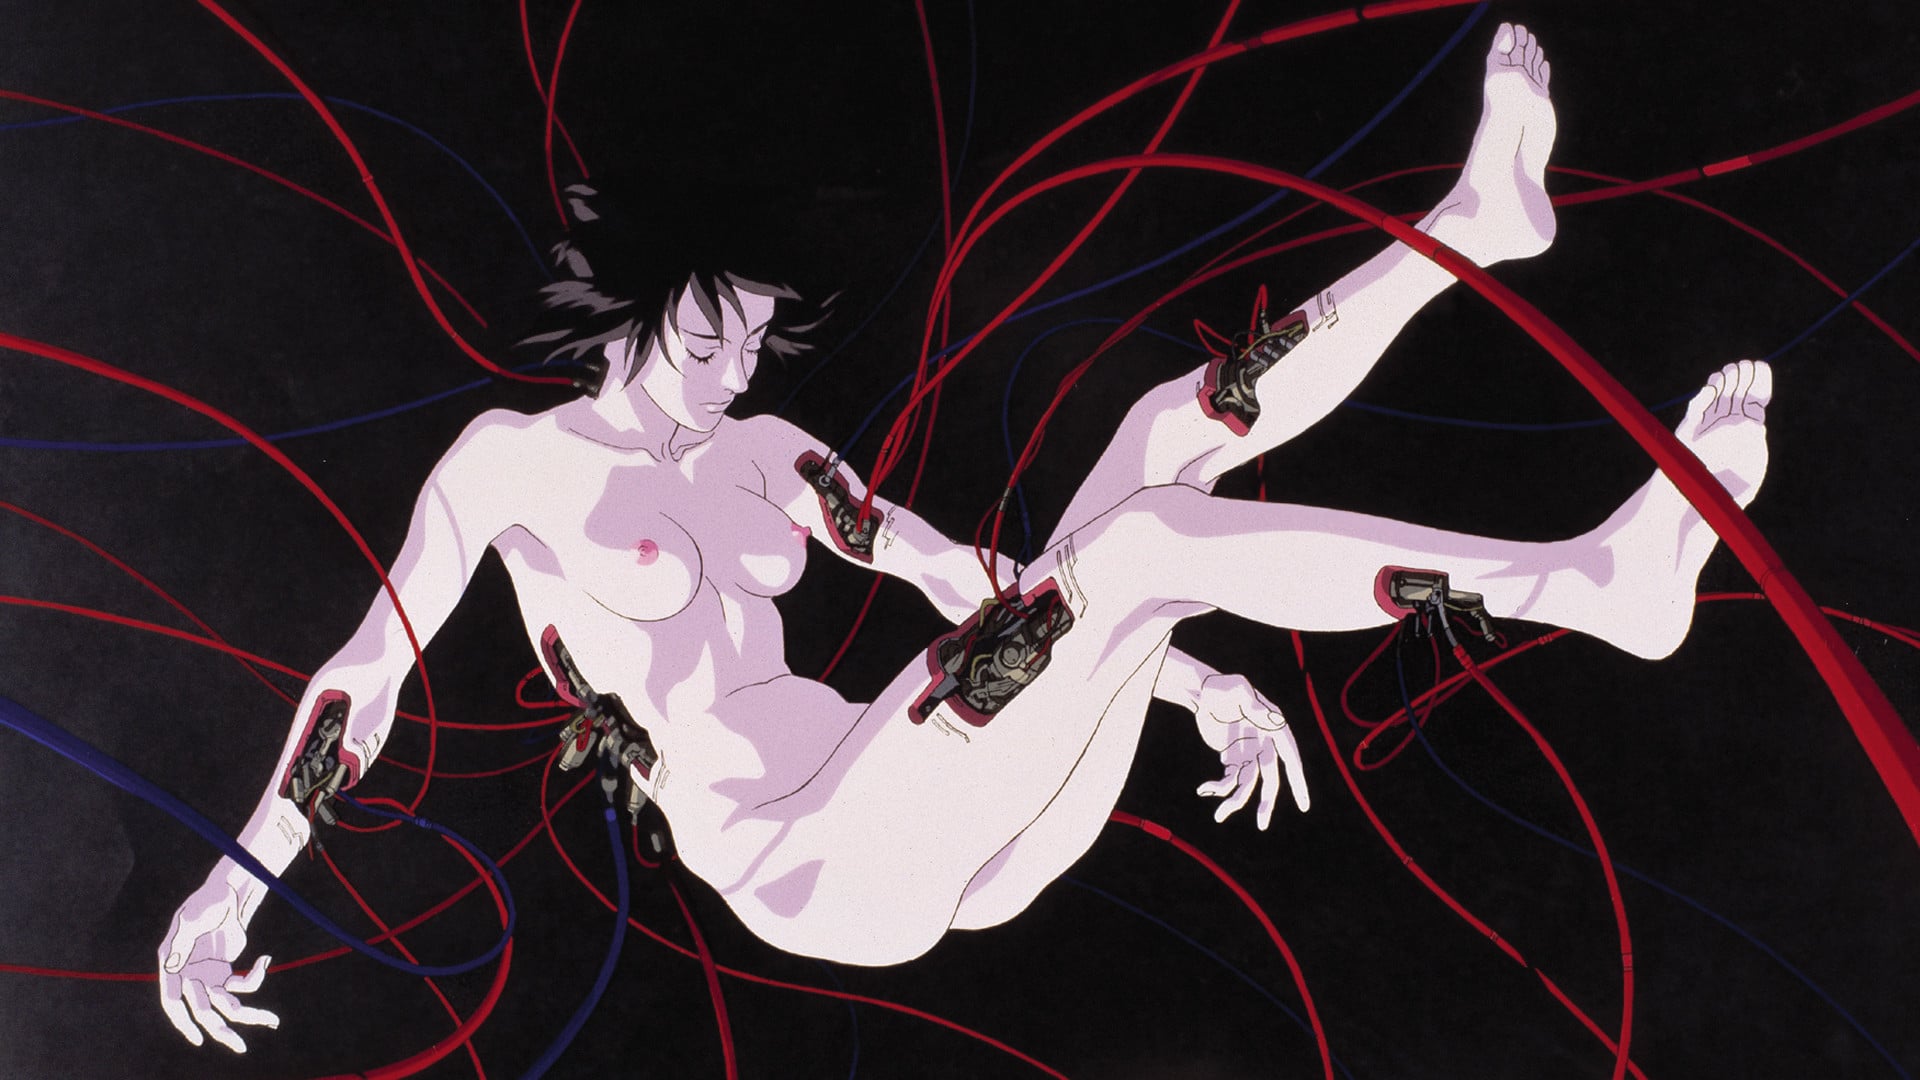 Ghost in the shell manga free download pdf